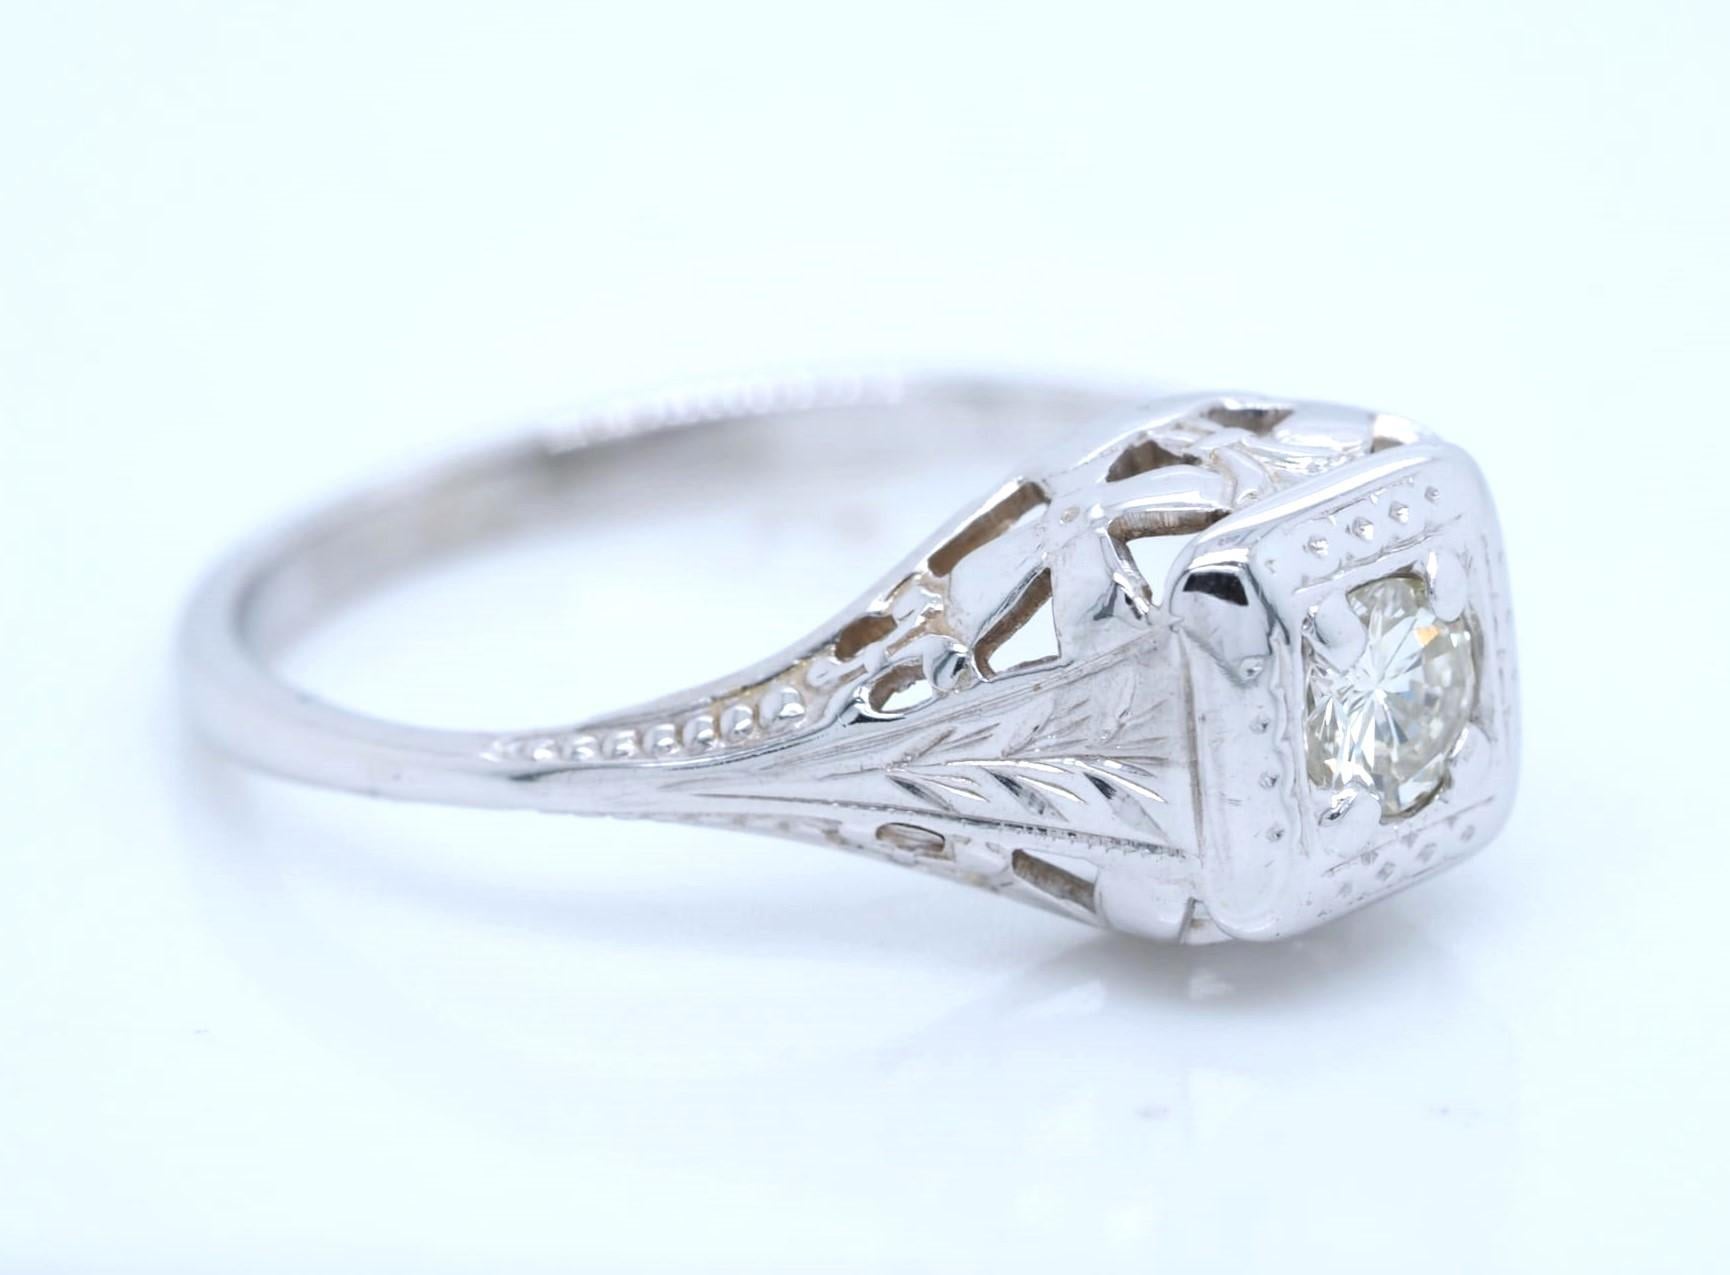 This vintage engagement ring is crafted from 14K white gold and features a stunning 0.25 ct round cut natural diamond. The prong setting style showcases the diamond's beauty, while the slightly included (SI1) clarity grade and I color grade add to